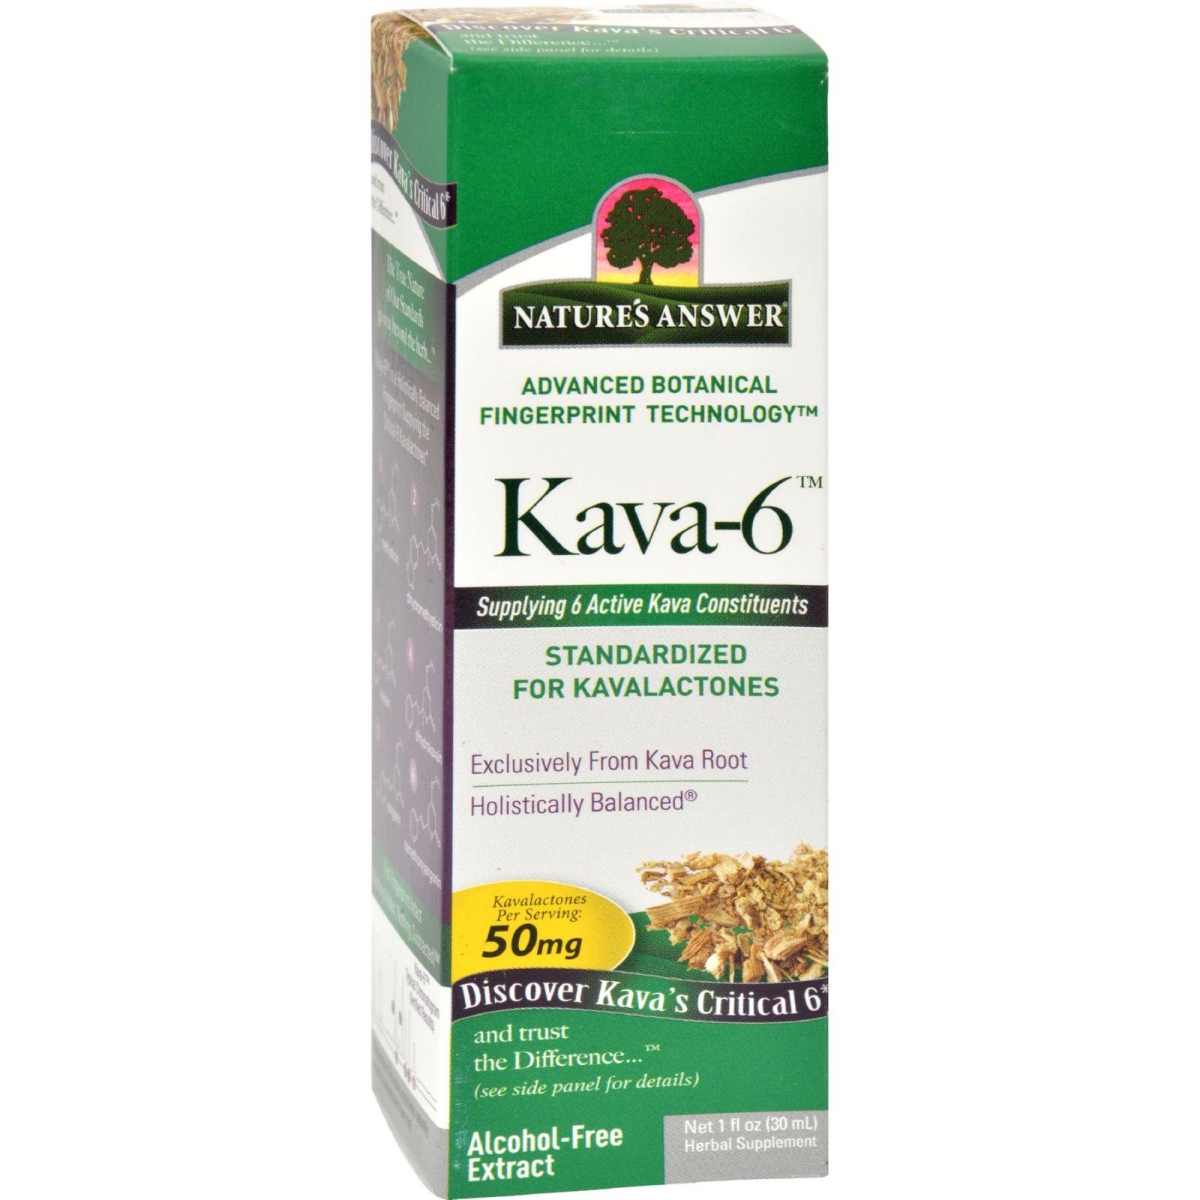 Natures Answer Hg1516236 1 Oz Kava 6 Extract - Alcohol Free